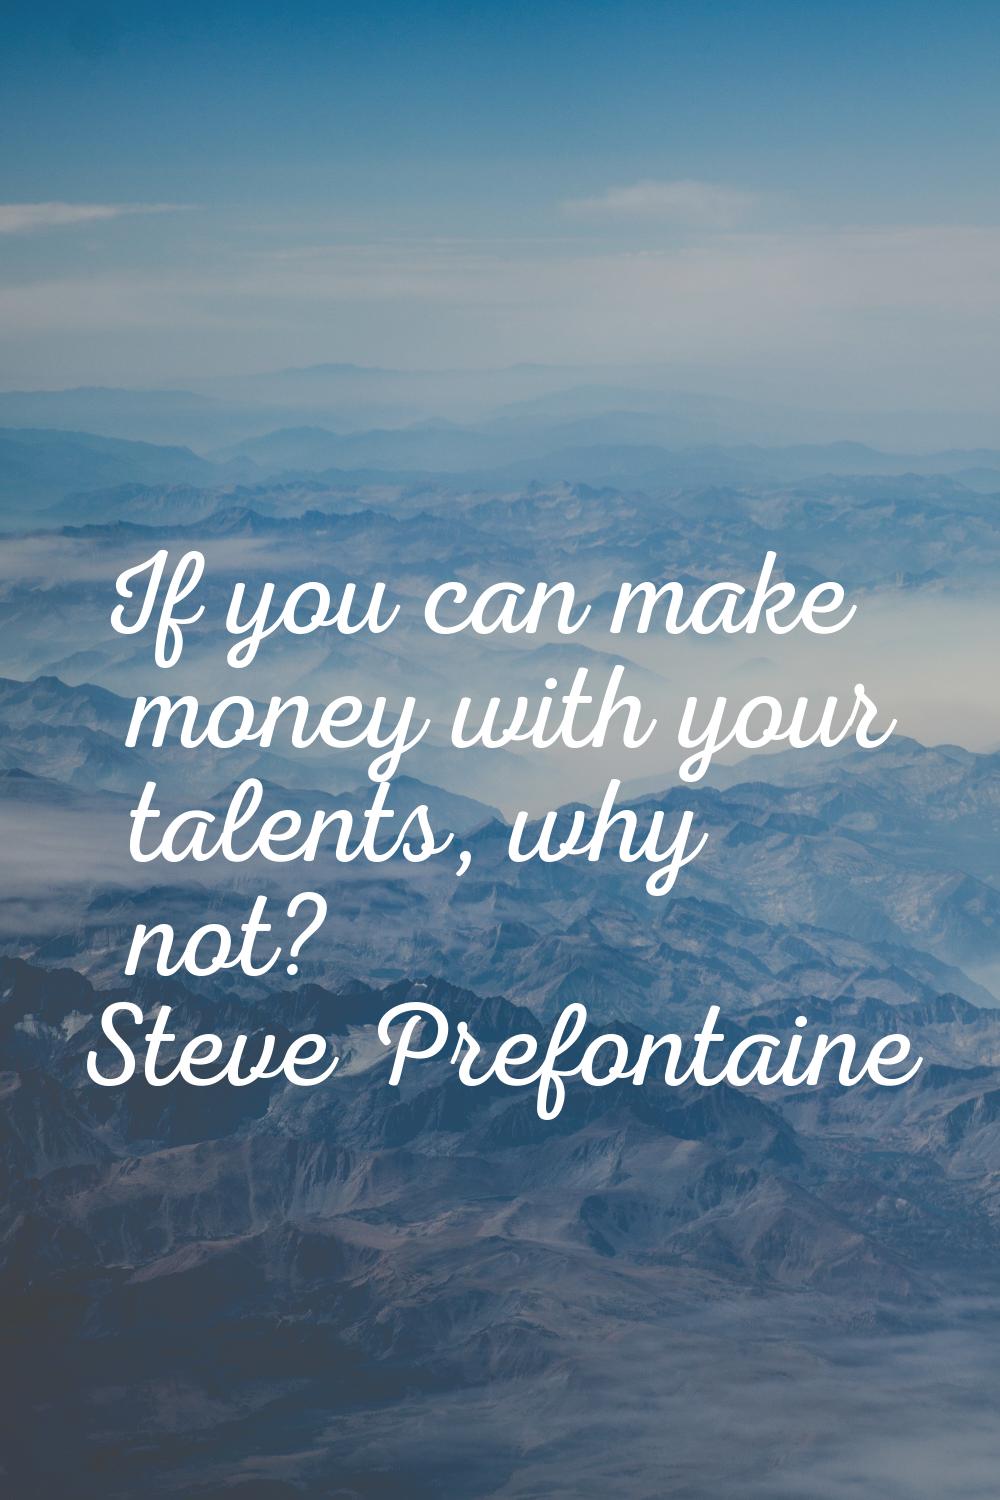 If you can make money with your talents, why not?